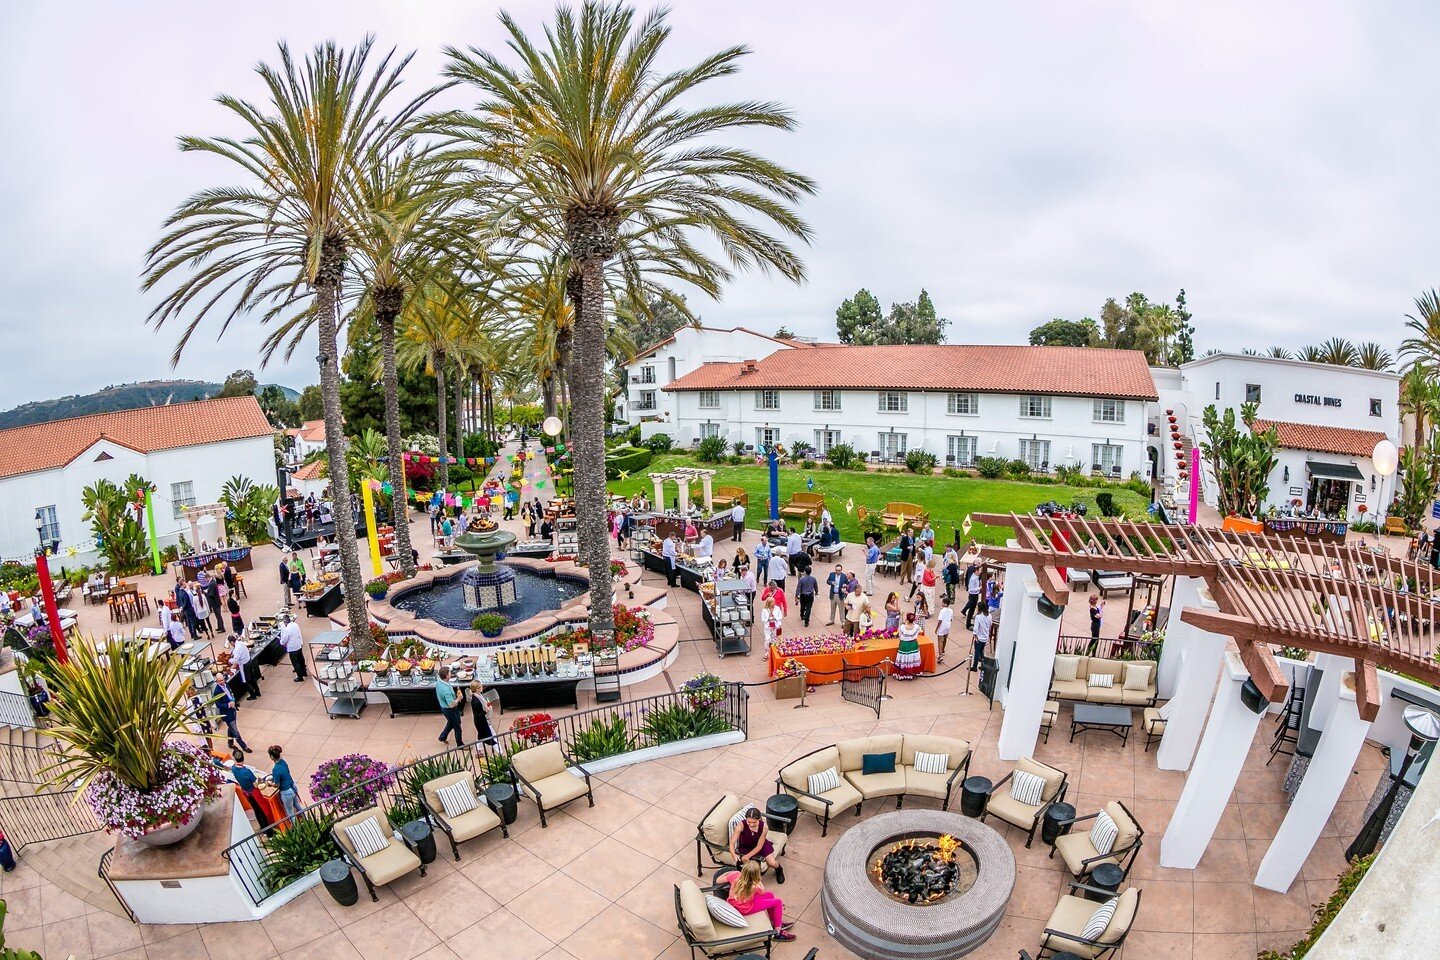 This fiesta at @omnilacosta was definitely one for the books!📚 A beautiful resort mixed with bright colors and delicious food is the perfect recipe for an event we will remember for a long time!
*
*
*
*
*
#omnilacostaresort #sandiego #sandiegoeventp